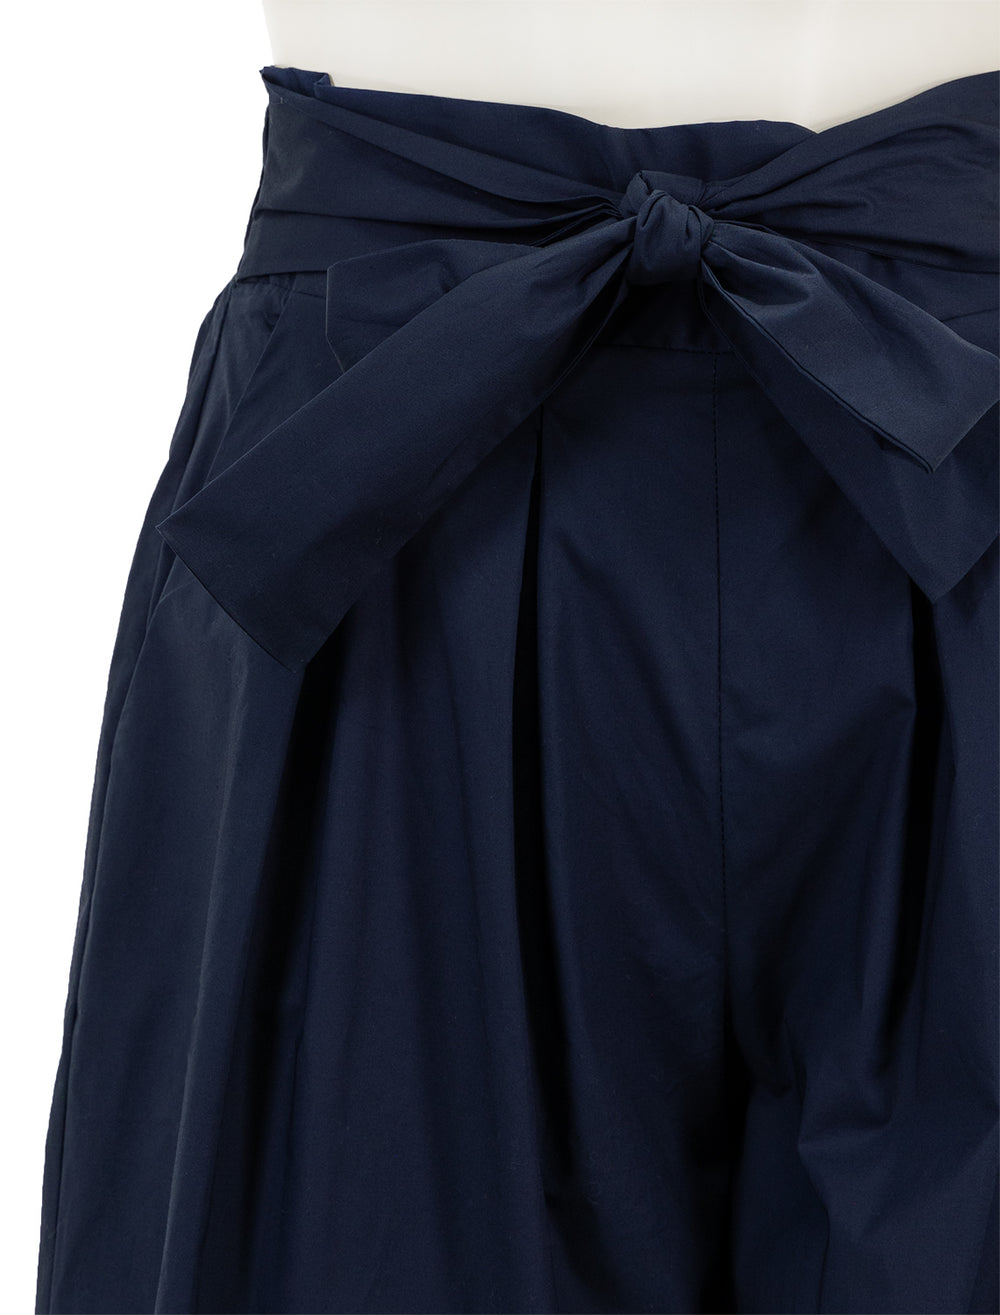 Close-up view of Vilagallo's marie goucho in navy.